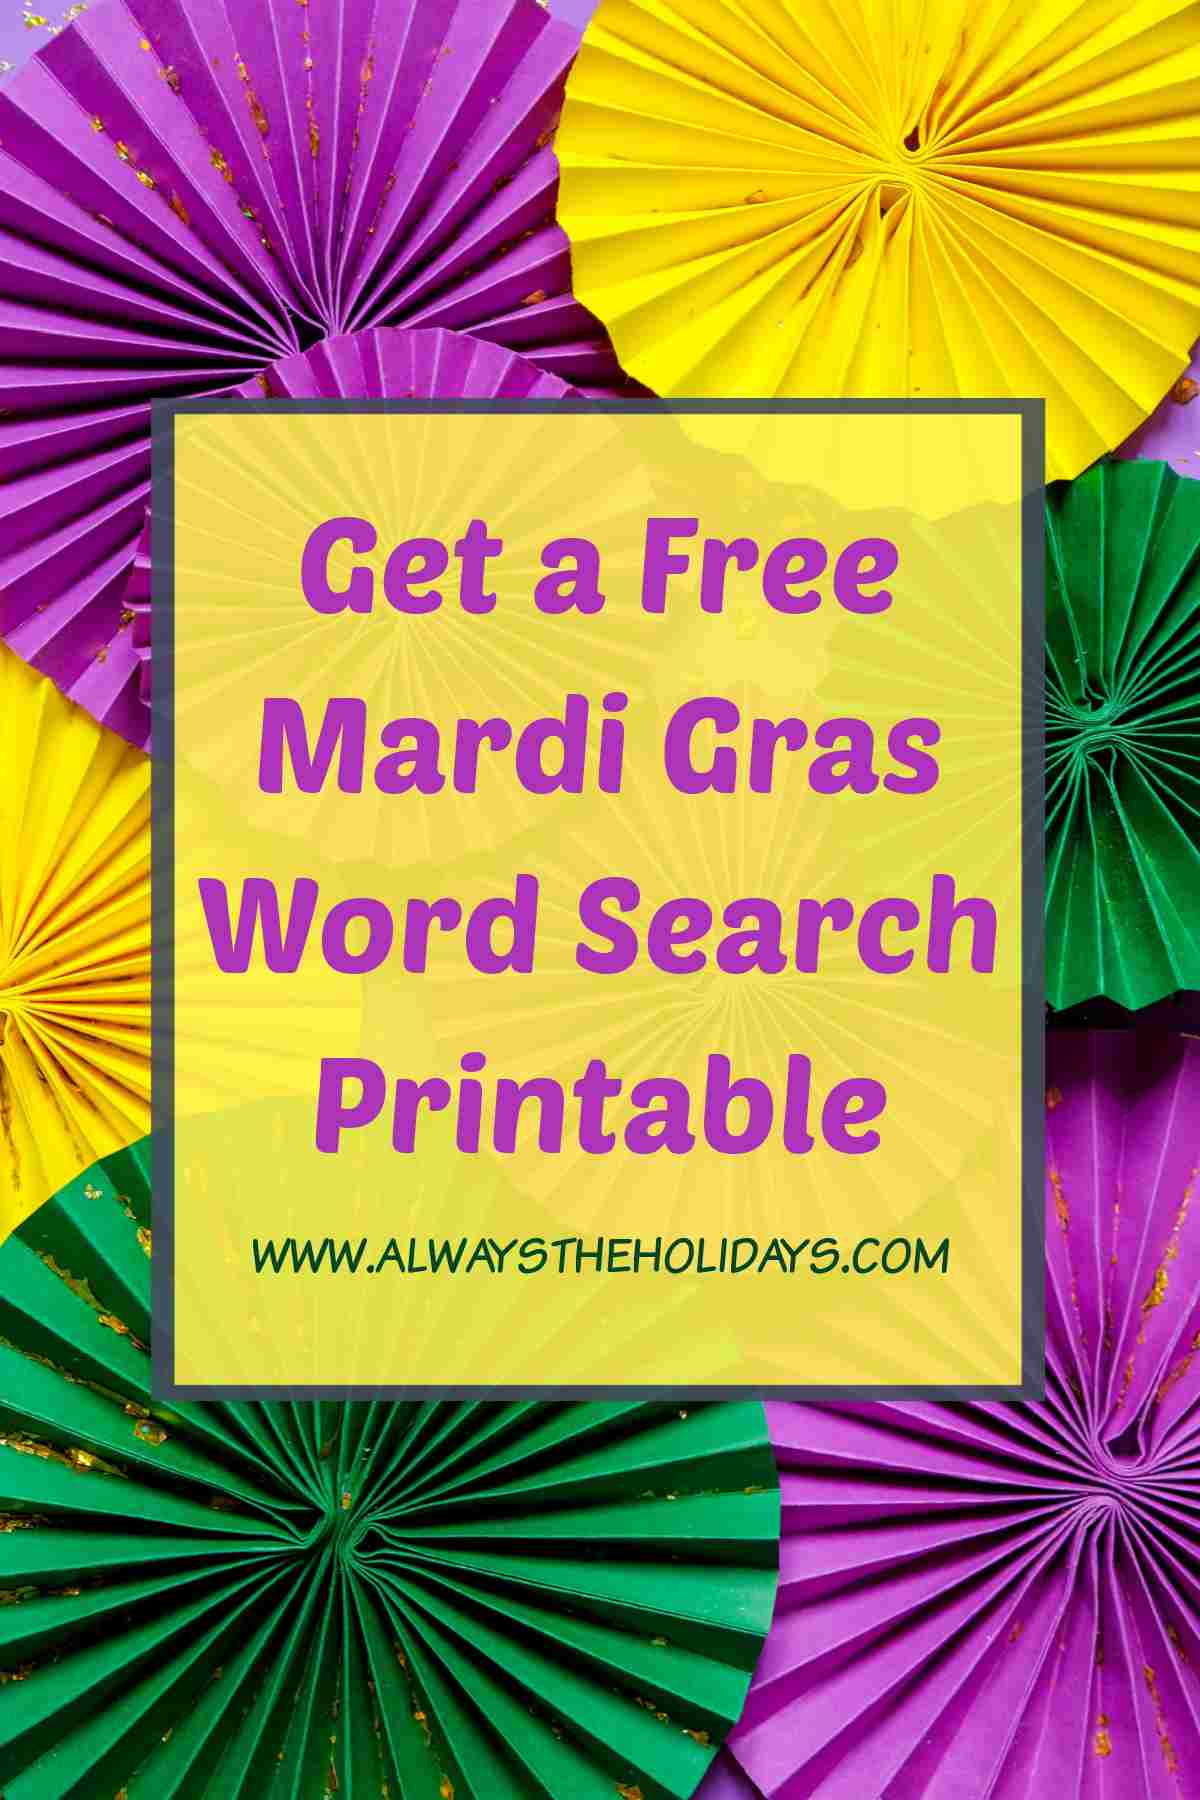 Fans in the colors of Mardi Gras (purple, green and gold) with a yellow rectangle on top of them and text in purple that reads "Get a free Mardi Gras word search printable".